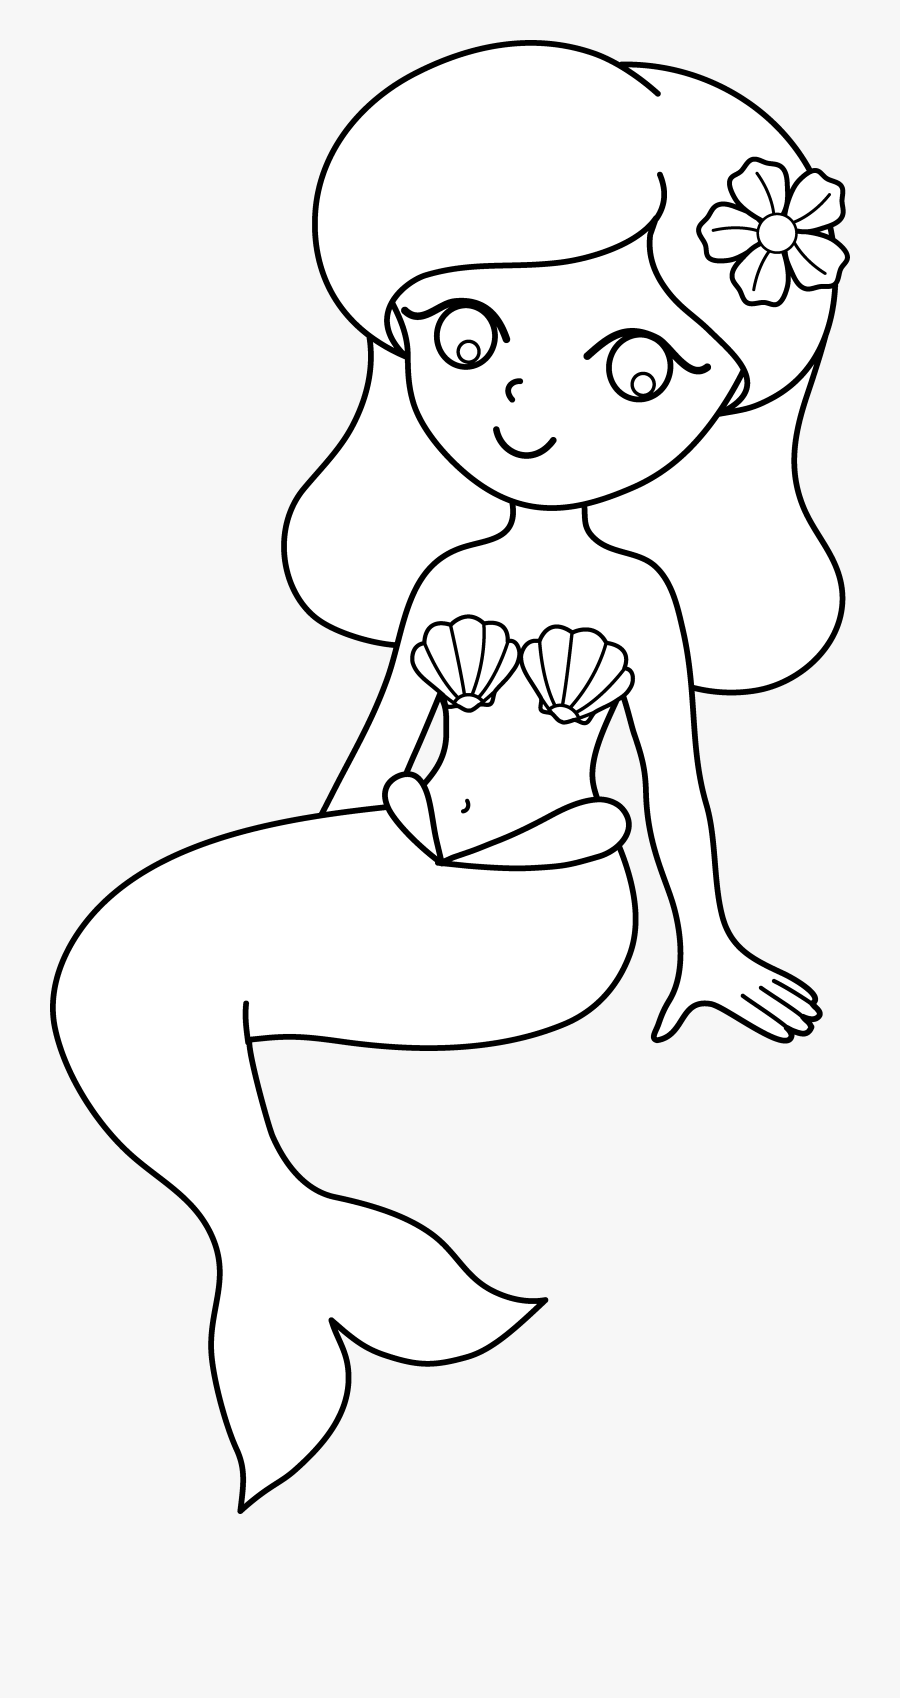 Clip Art Clip Art Royalty - Easy Mermaid Coloring Pages, Transparent Clipart